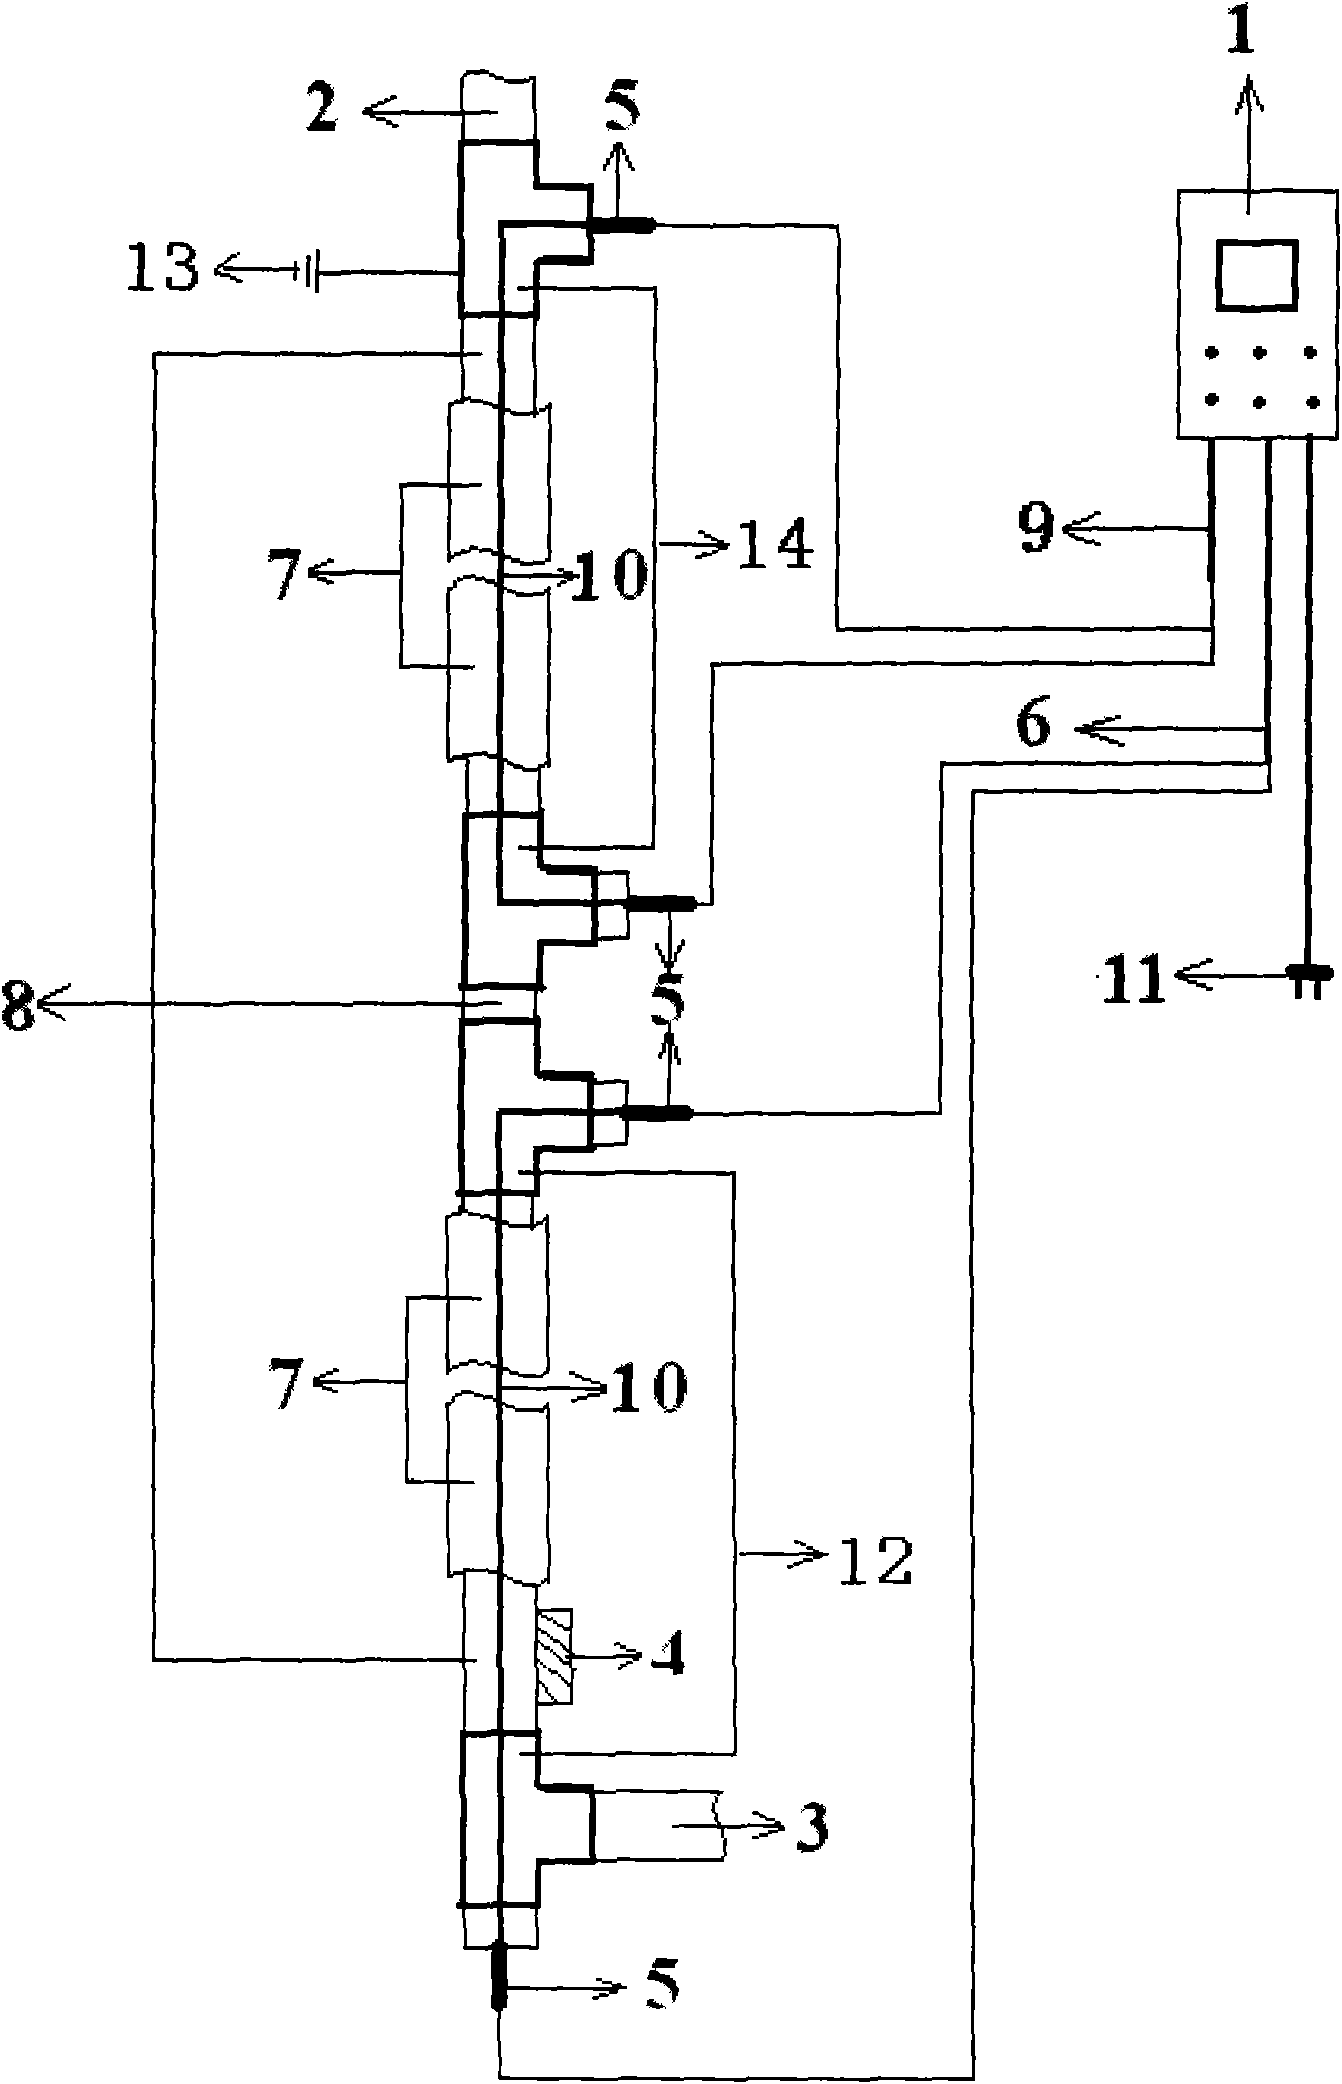 Heating constant-temperature system for hot water pipeline